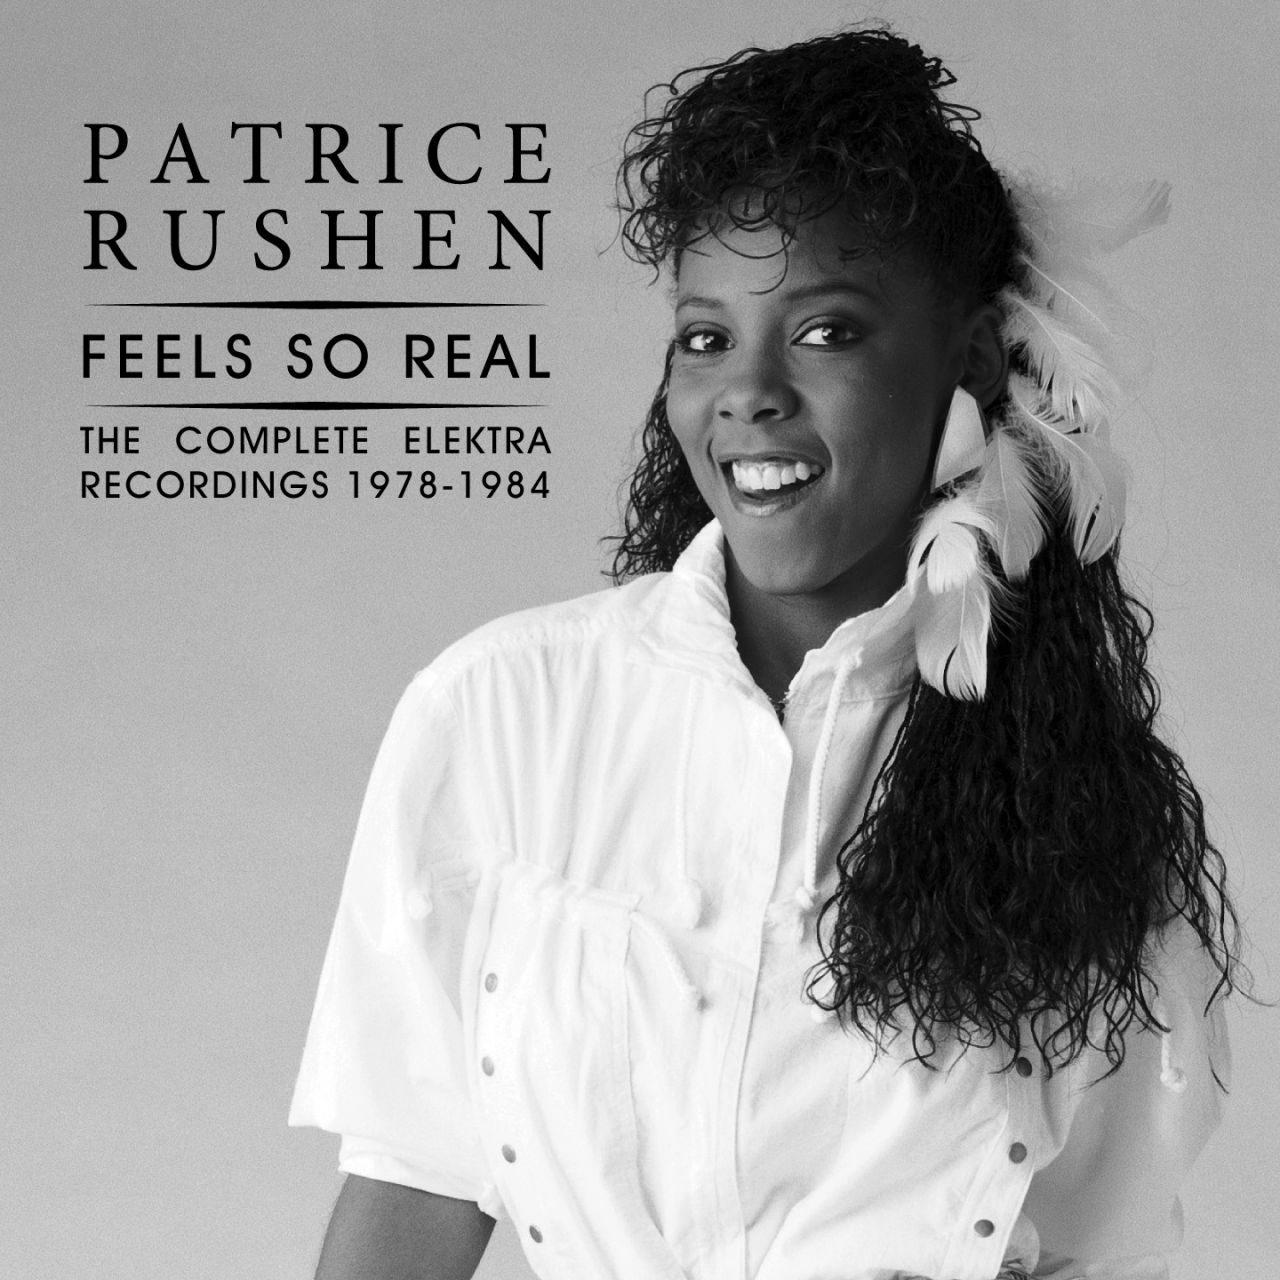 Patrice Rushen - Feels So Real: The Complete Elektra Recordings 1978-1984 - 5CD